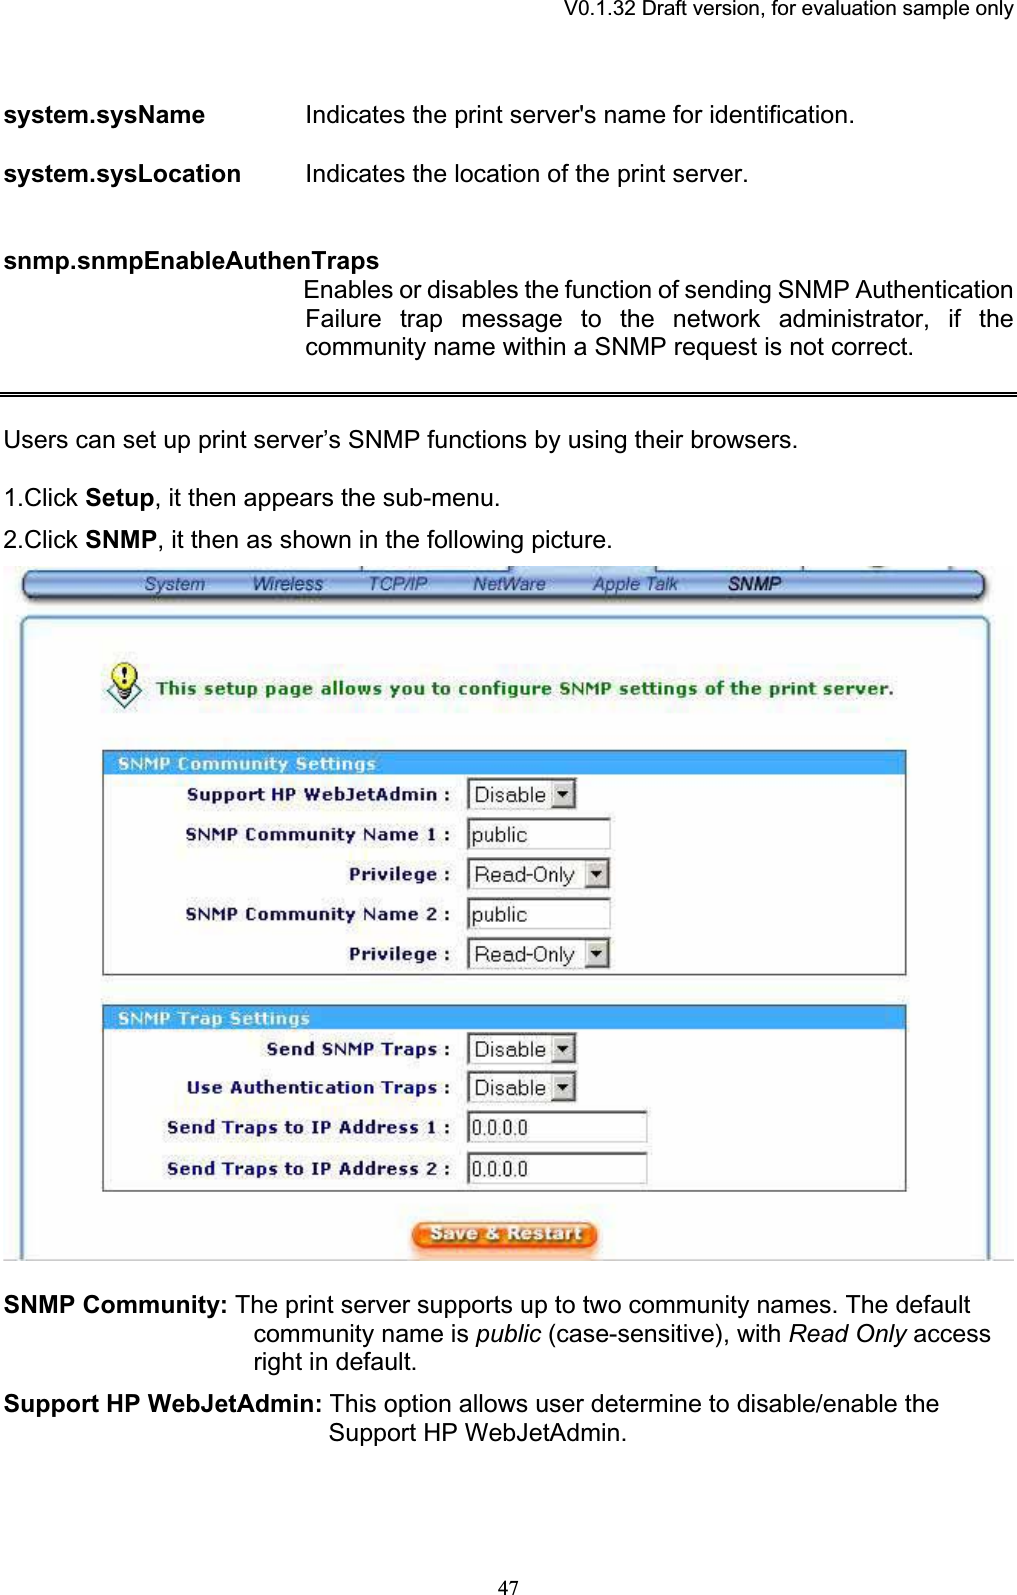 V0.1.32 Draft version, for evaluation sample onlysystem.sysName Indicates the print server&apos;s name for identification. system.sysLocation Indicates the location of the print server. snmp.snmpEnableAuthenTrapsEnables or disables the function of sending SNMP Authentication Failure trap message to the network administrator, if the community name within a SNMP request is not correct. Users can set up print server’s SNMP functions by using their browsers. 1.Click Setup, it then appears the sub-menu. 2.Click SNMP, it then as shown in the following picture. SNMP Community: The print server supports up to two community names. The default community name is public (case-sensitive), with Read Only access right in default. Support HP WebJetAdmin: This option allows user determine to disable/enable the Support HP WebJetAdmin. 47